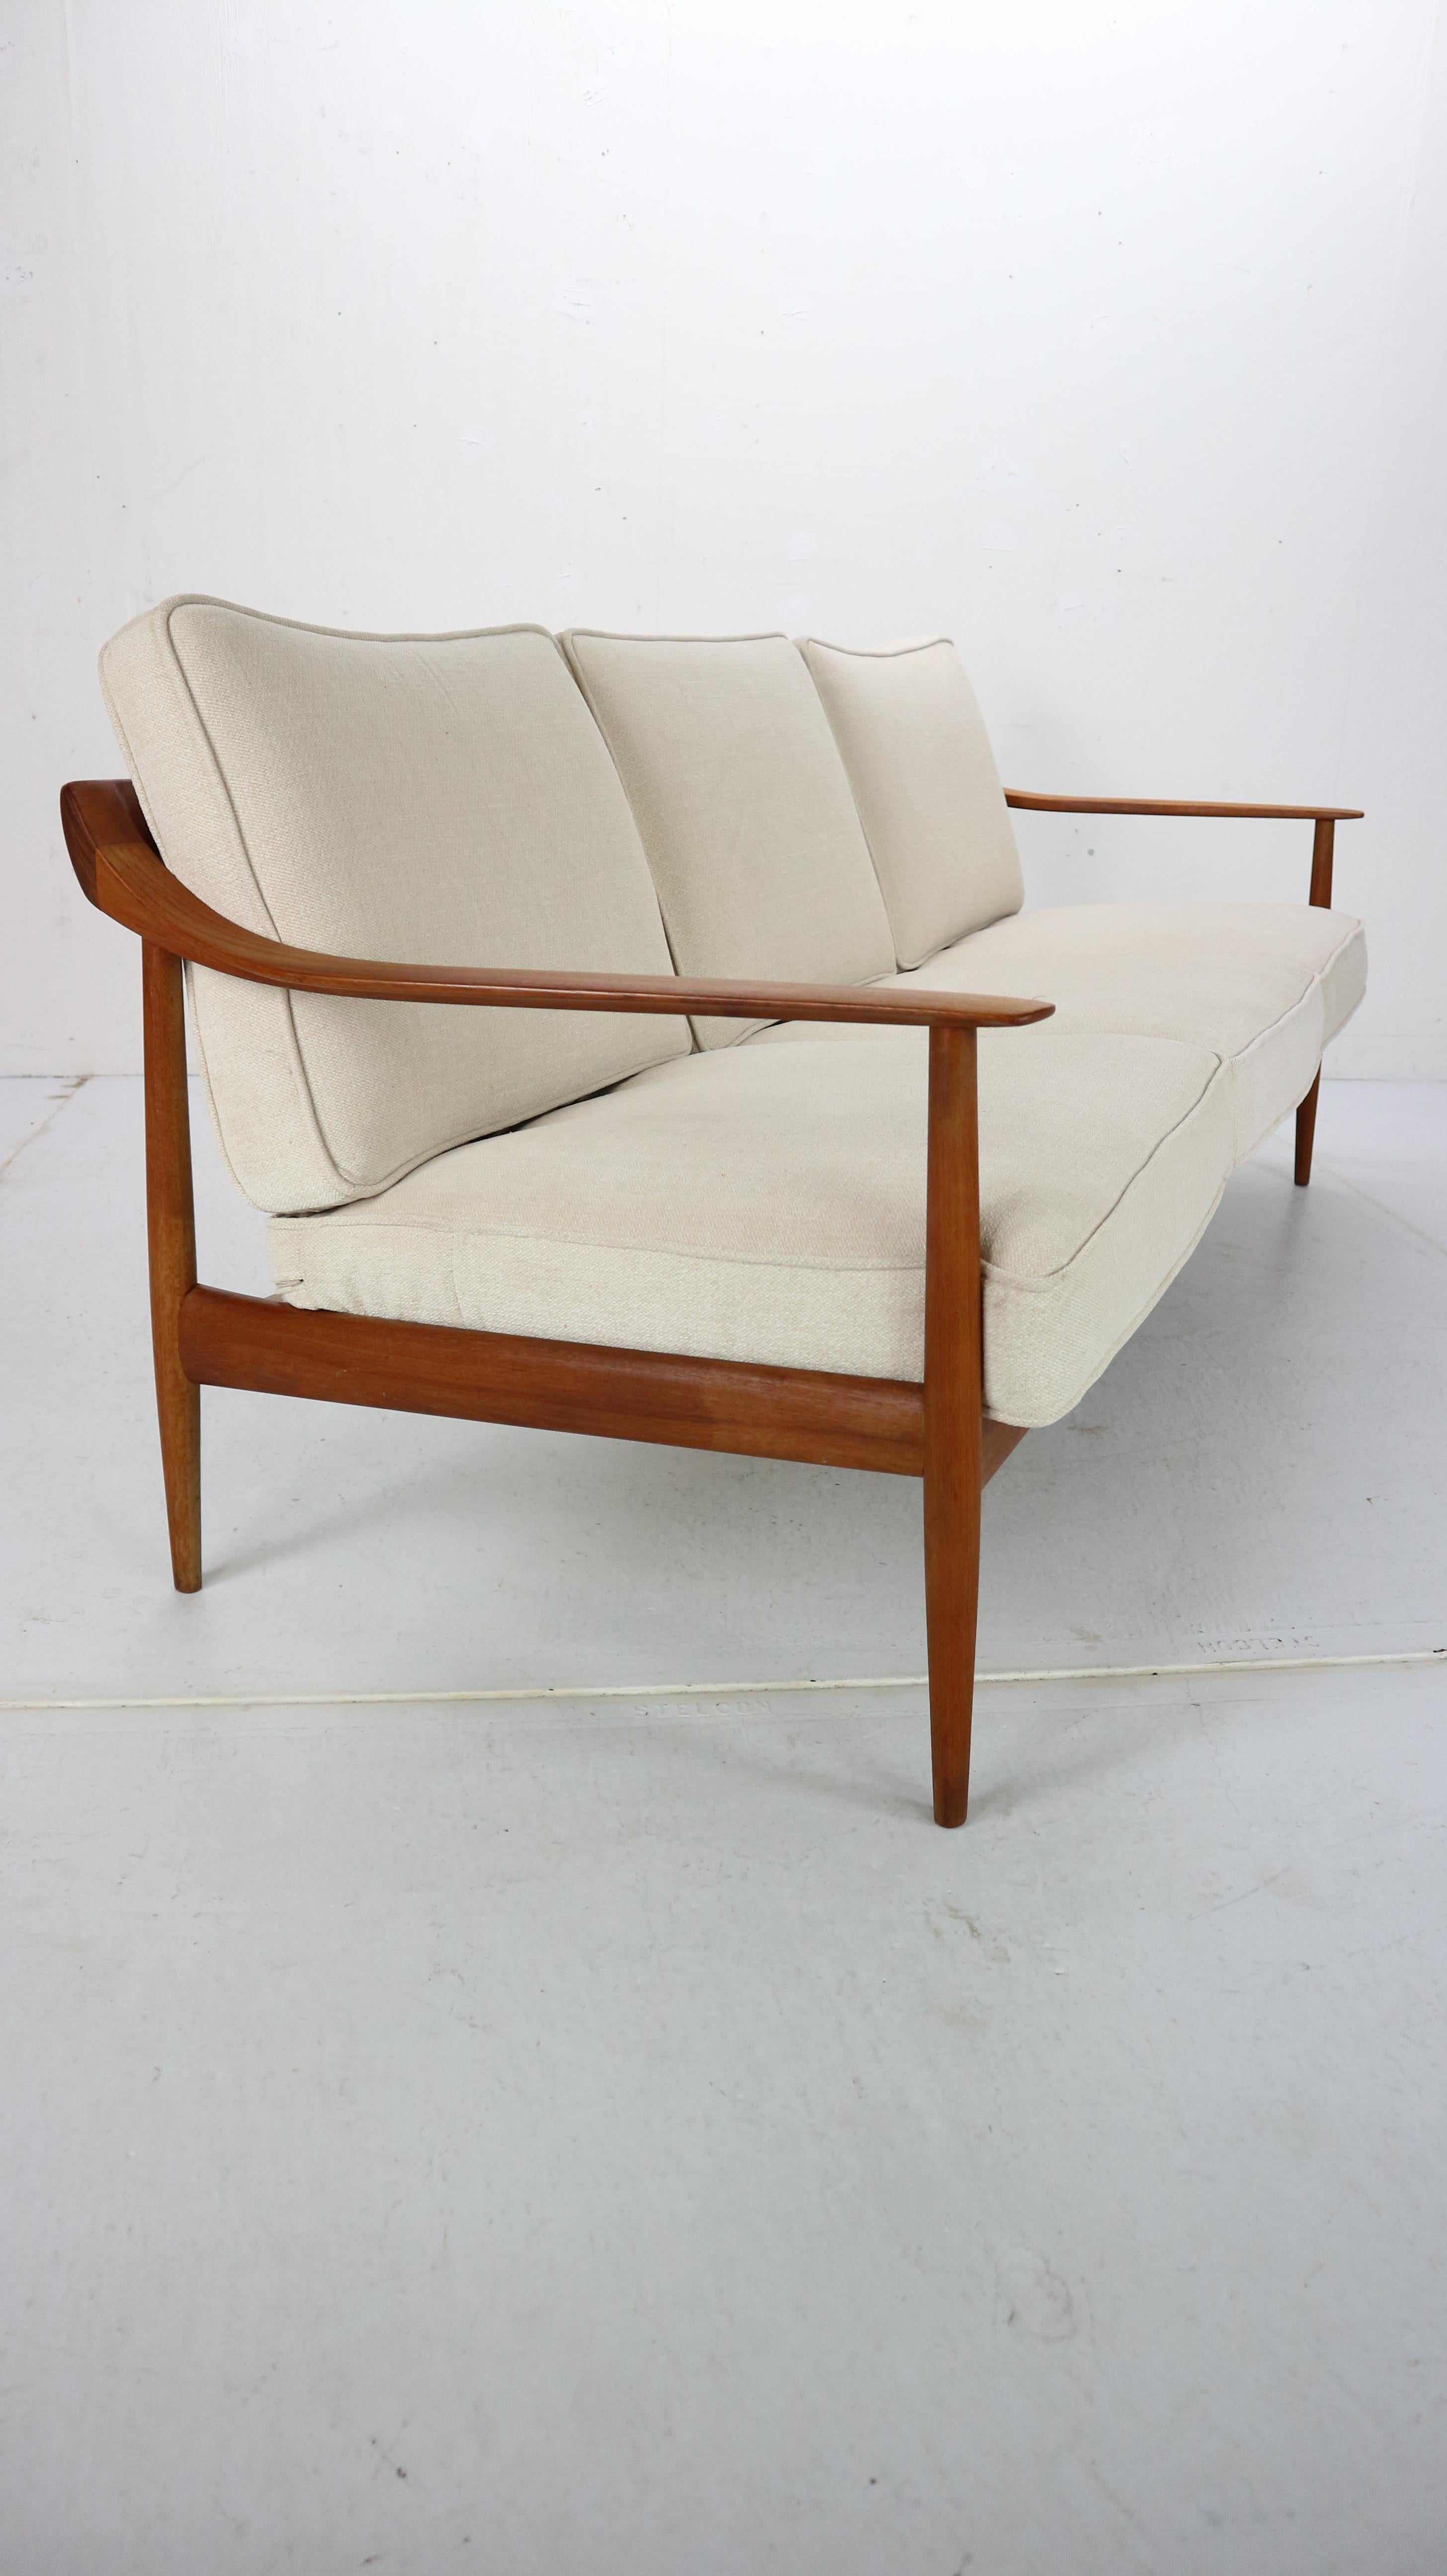 Mid-Century Modern design 3-seat sofa in a very good condition by Willhelm Knoll, 1960s, Germany.
The legendary 